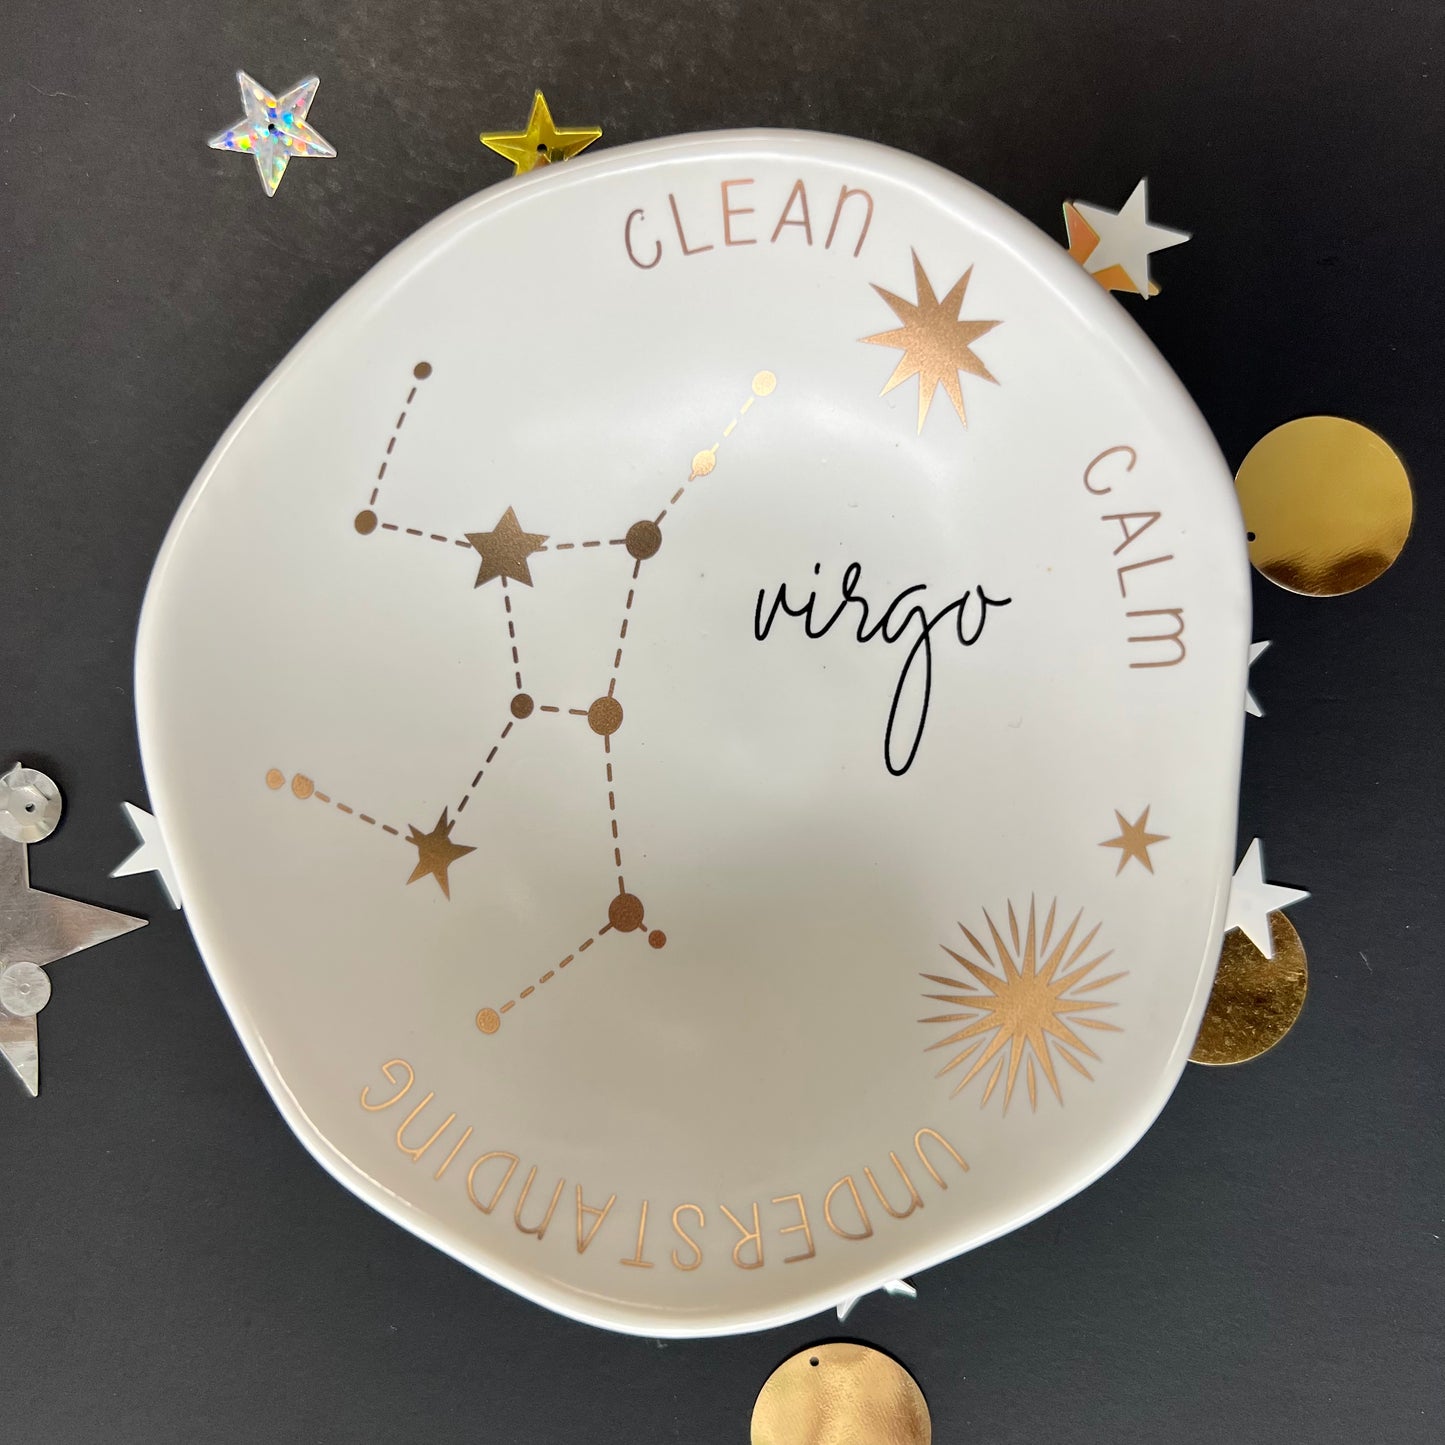 cream dish with gold stars and "Virgo Clean Calm Understanding" around the inner rim on a black background with scattered stars and orbs.